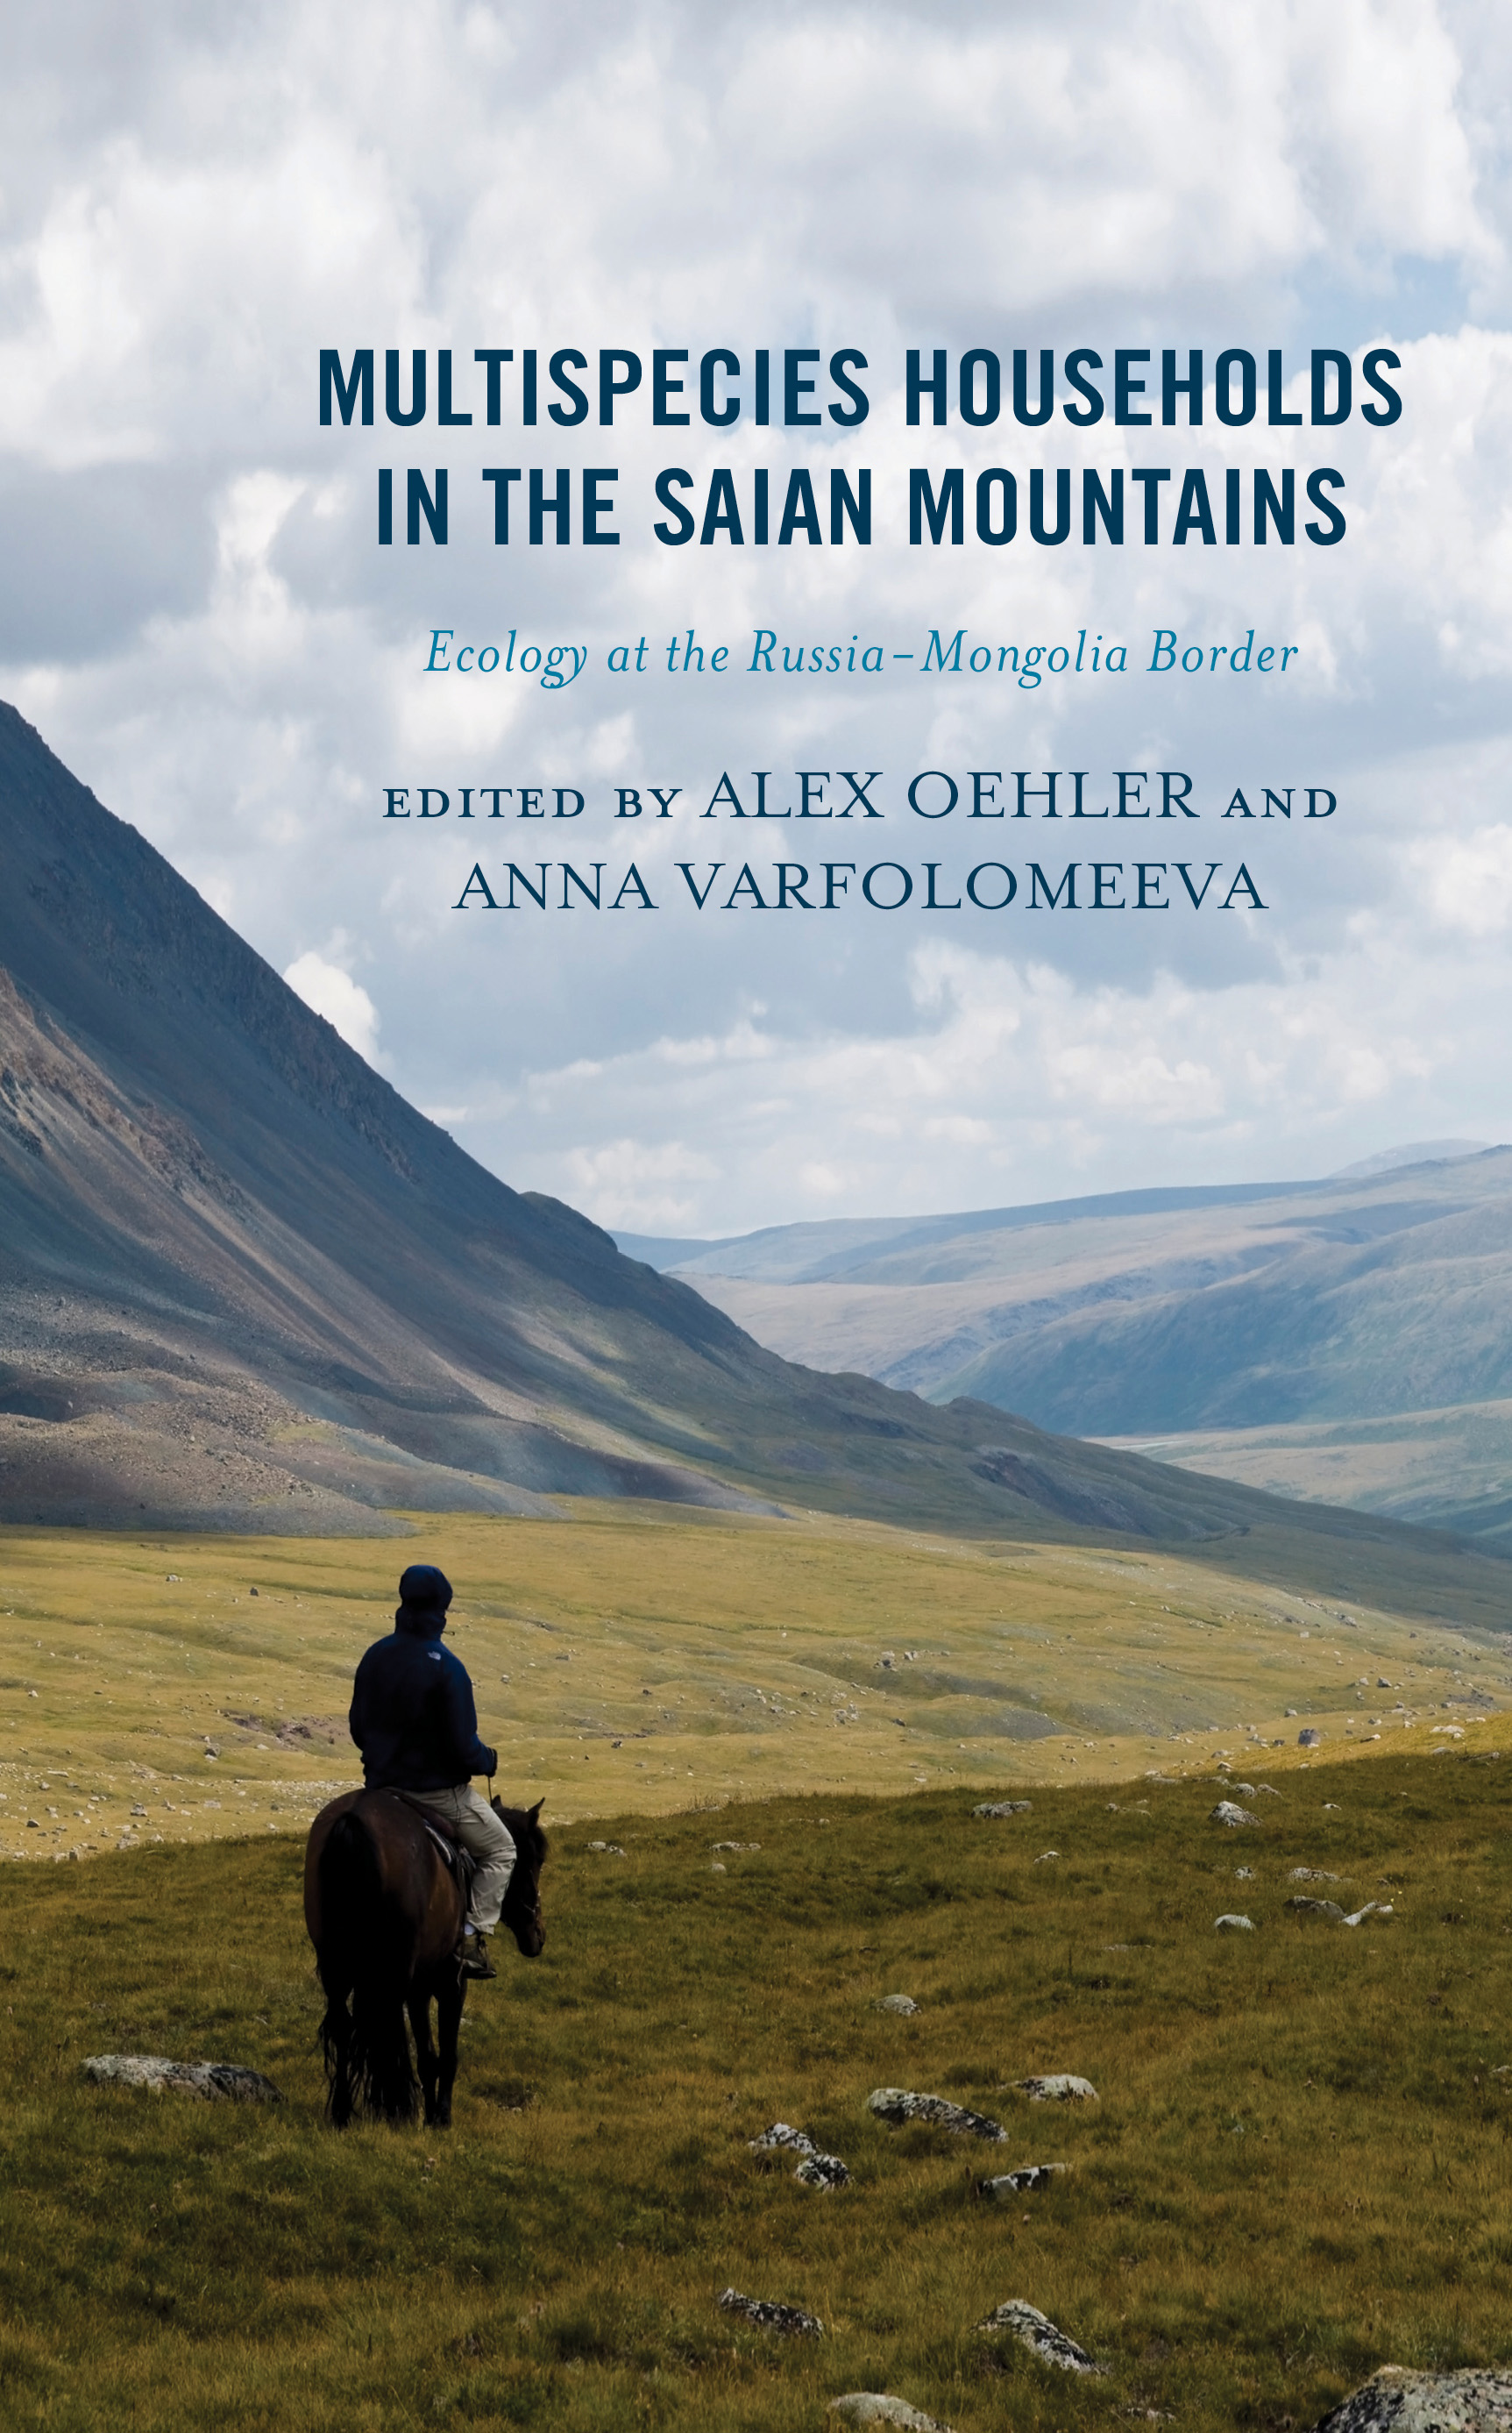 Multispecies Households in the Saian Mountains: Ecology at the Russia-Mongolia Border